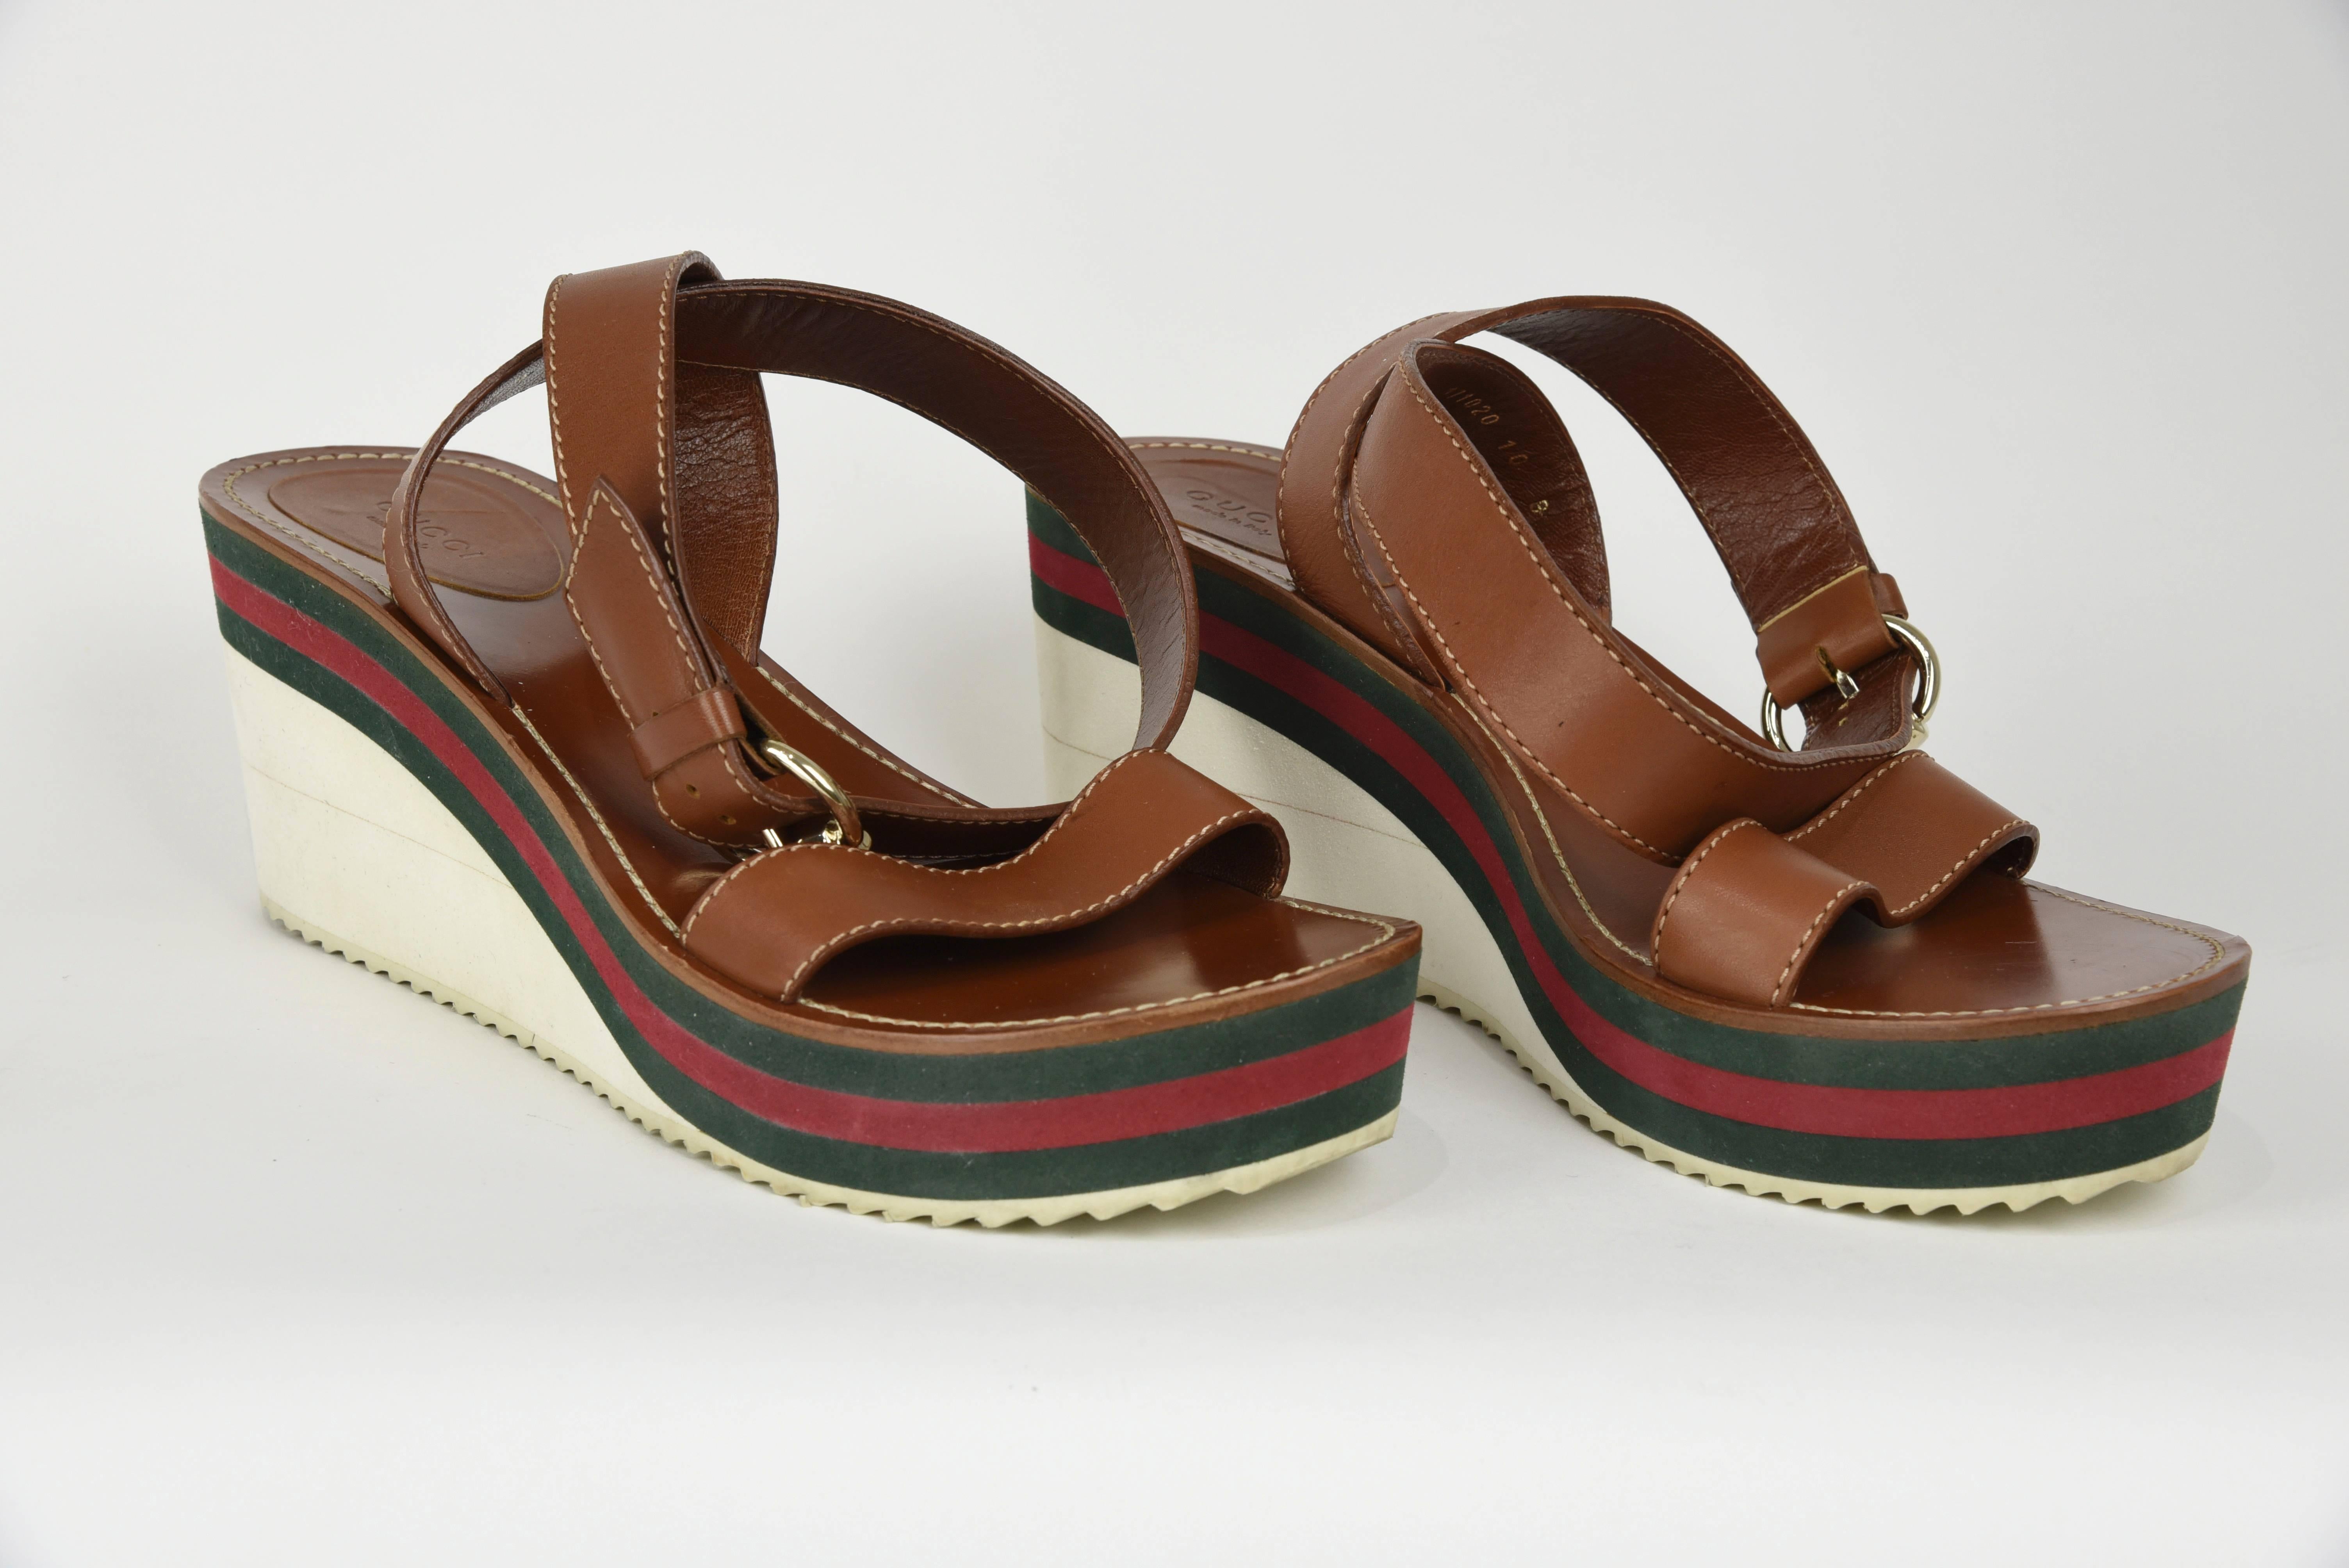 2000s Gucci Brown, Red and Green Platform Sandals with Ankle Wrap, Size 10 B 1